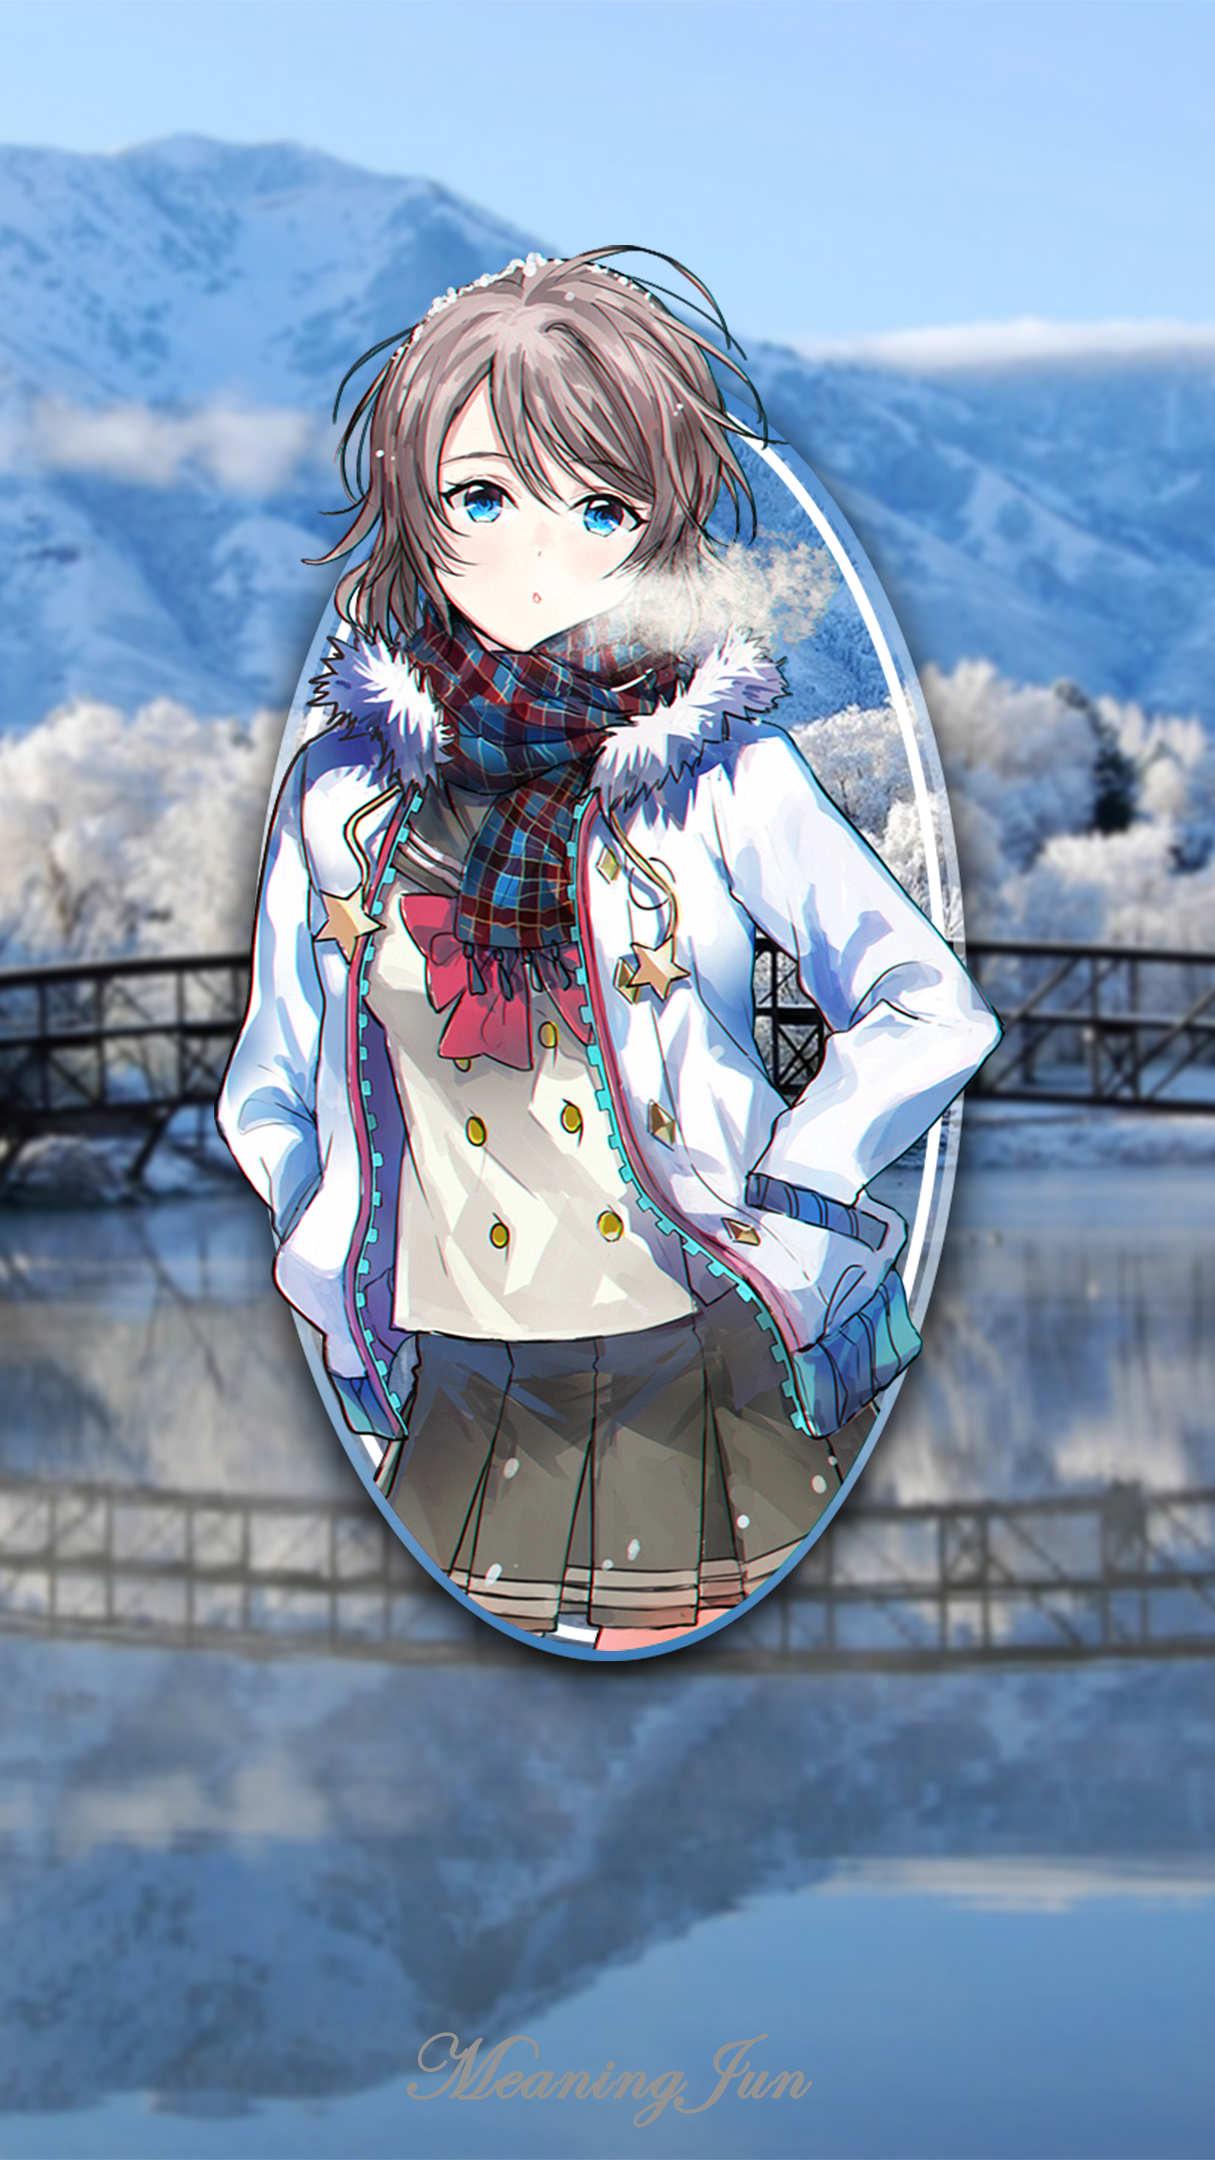 Anime 1215x2160 2D anime girls anime picture-in-picture Love Live! Sunshine Watanabe You Love Live! winter reflection bridge mountains river blue eyes